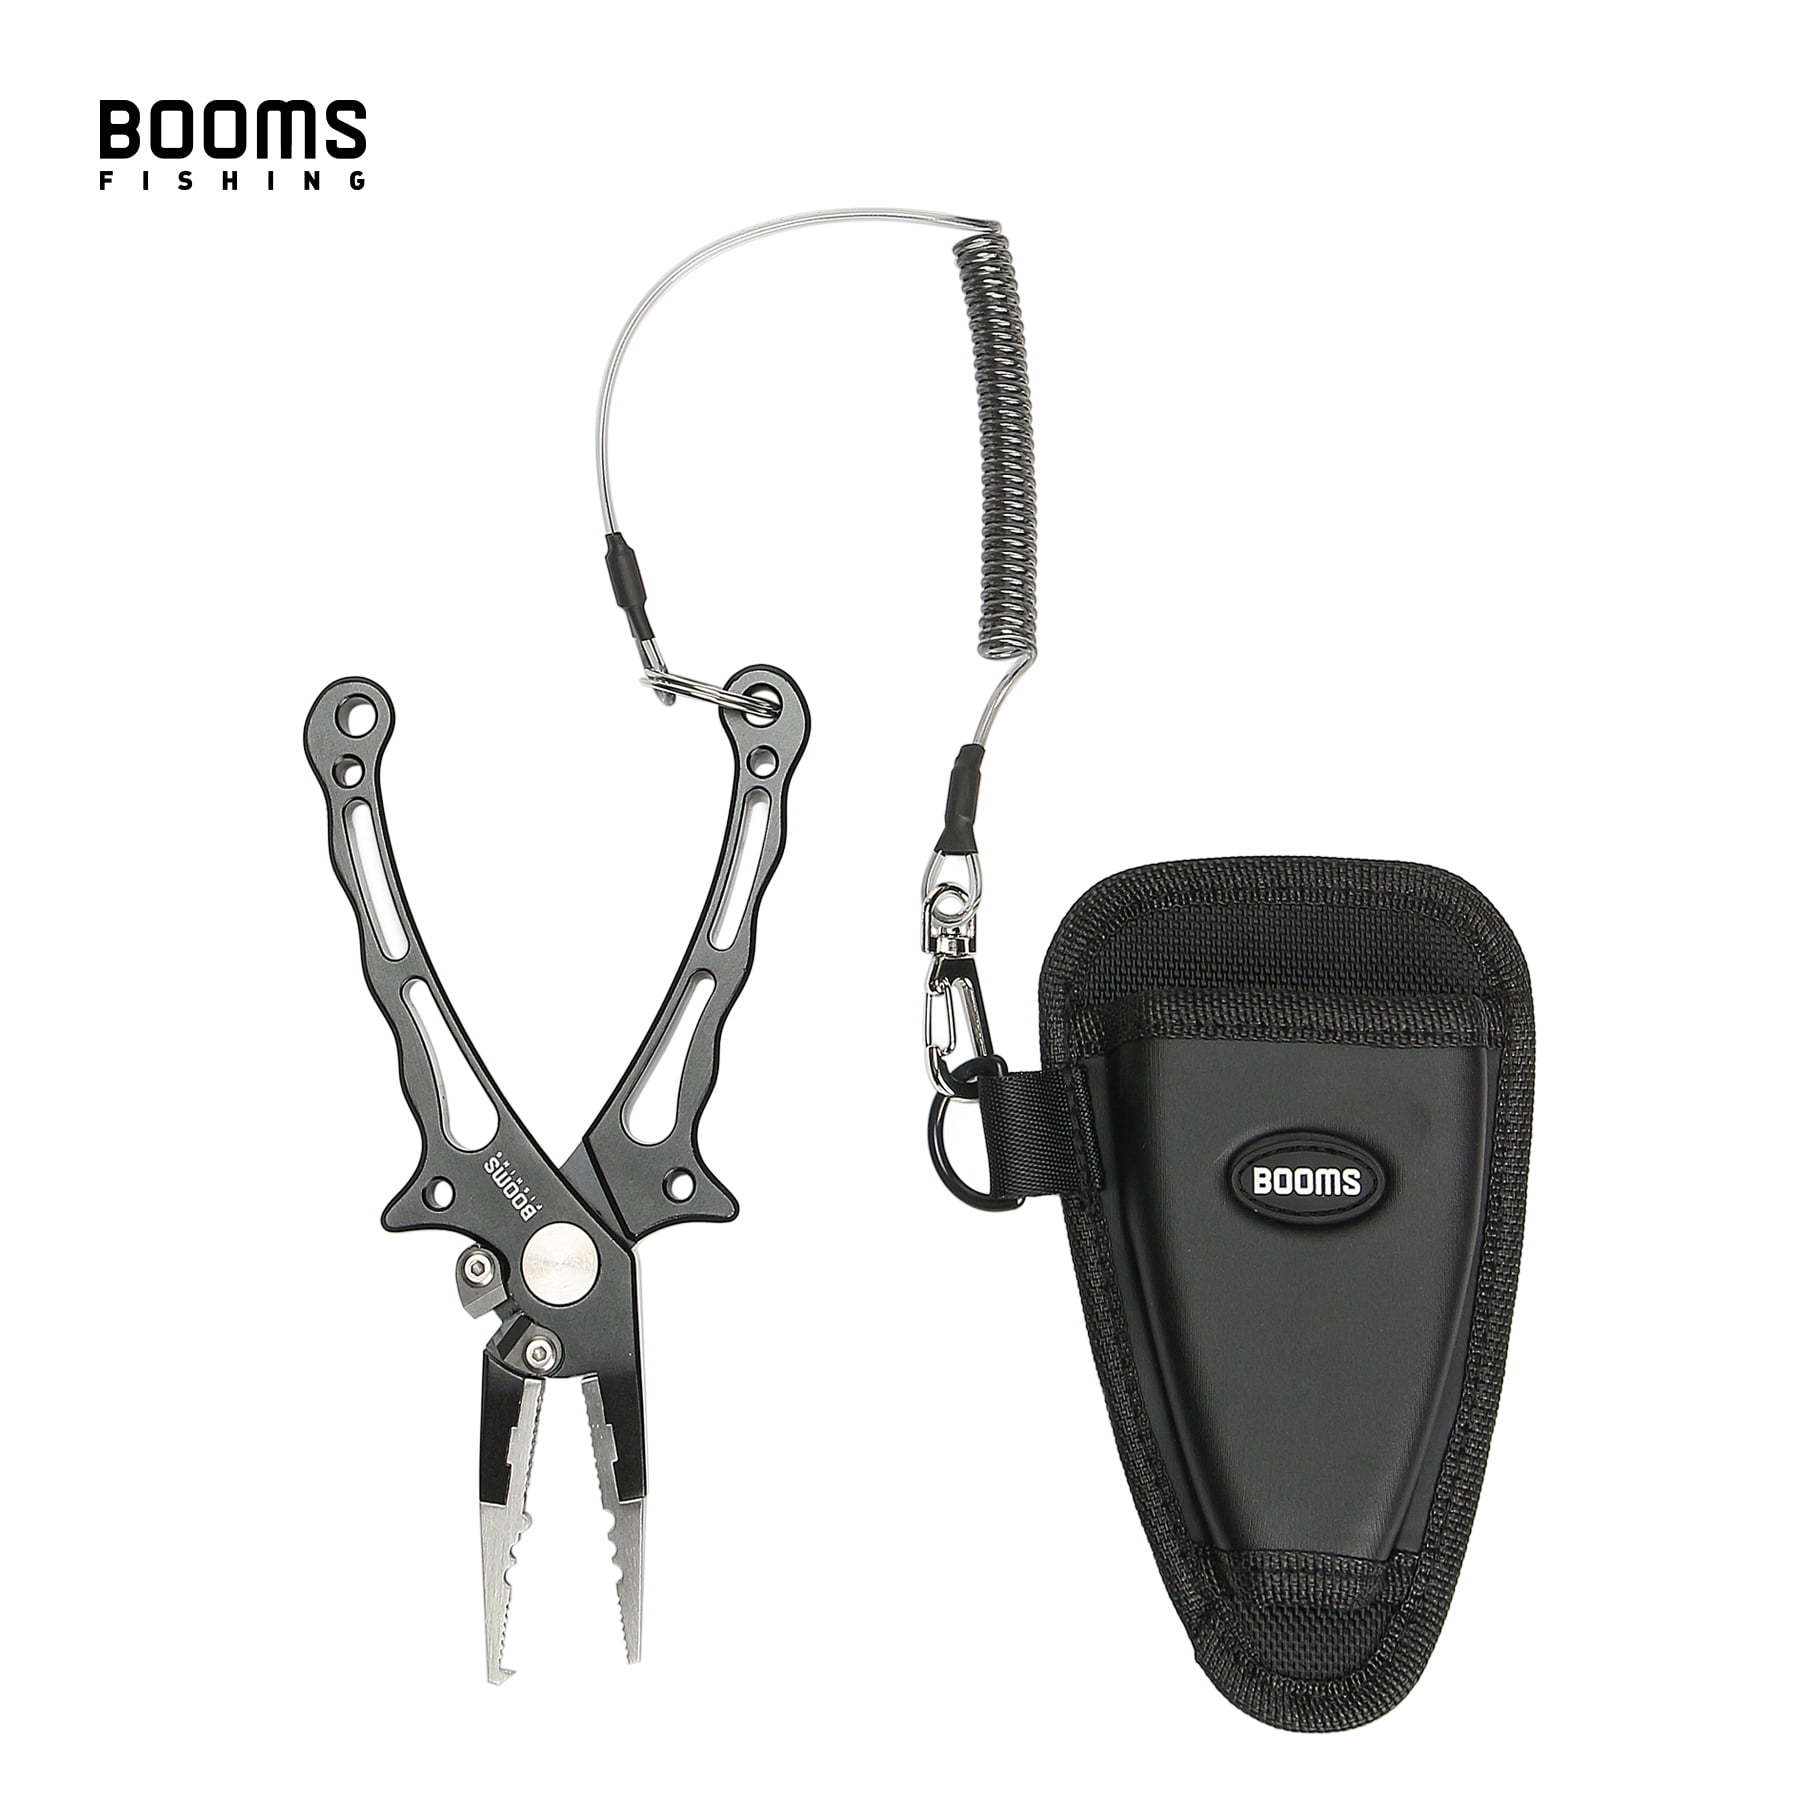 Booms Fishing X07 Quick-Cut Fishing Pliers Saltwater with Lanyard 